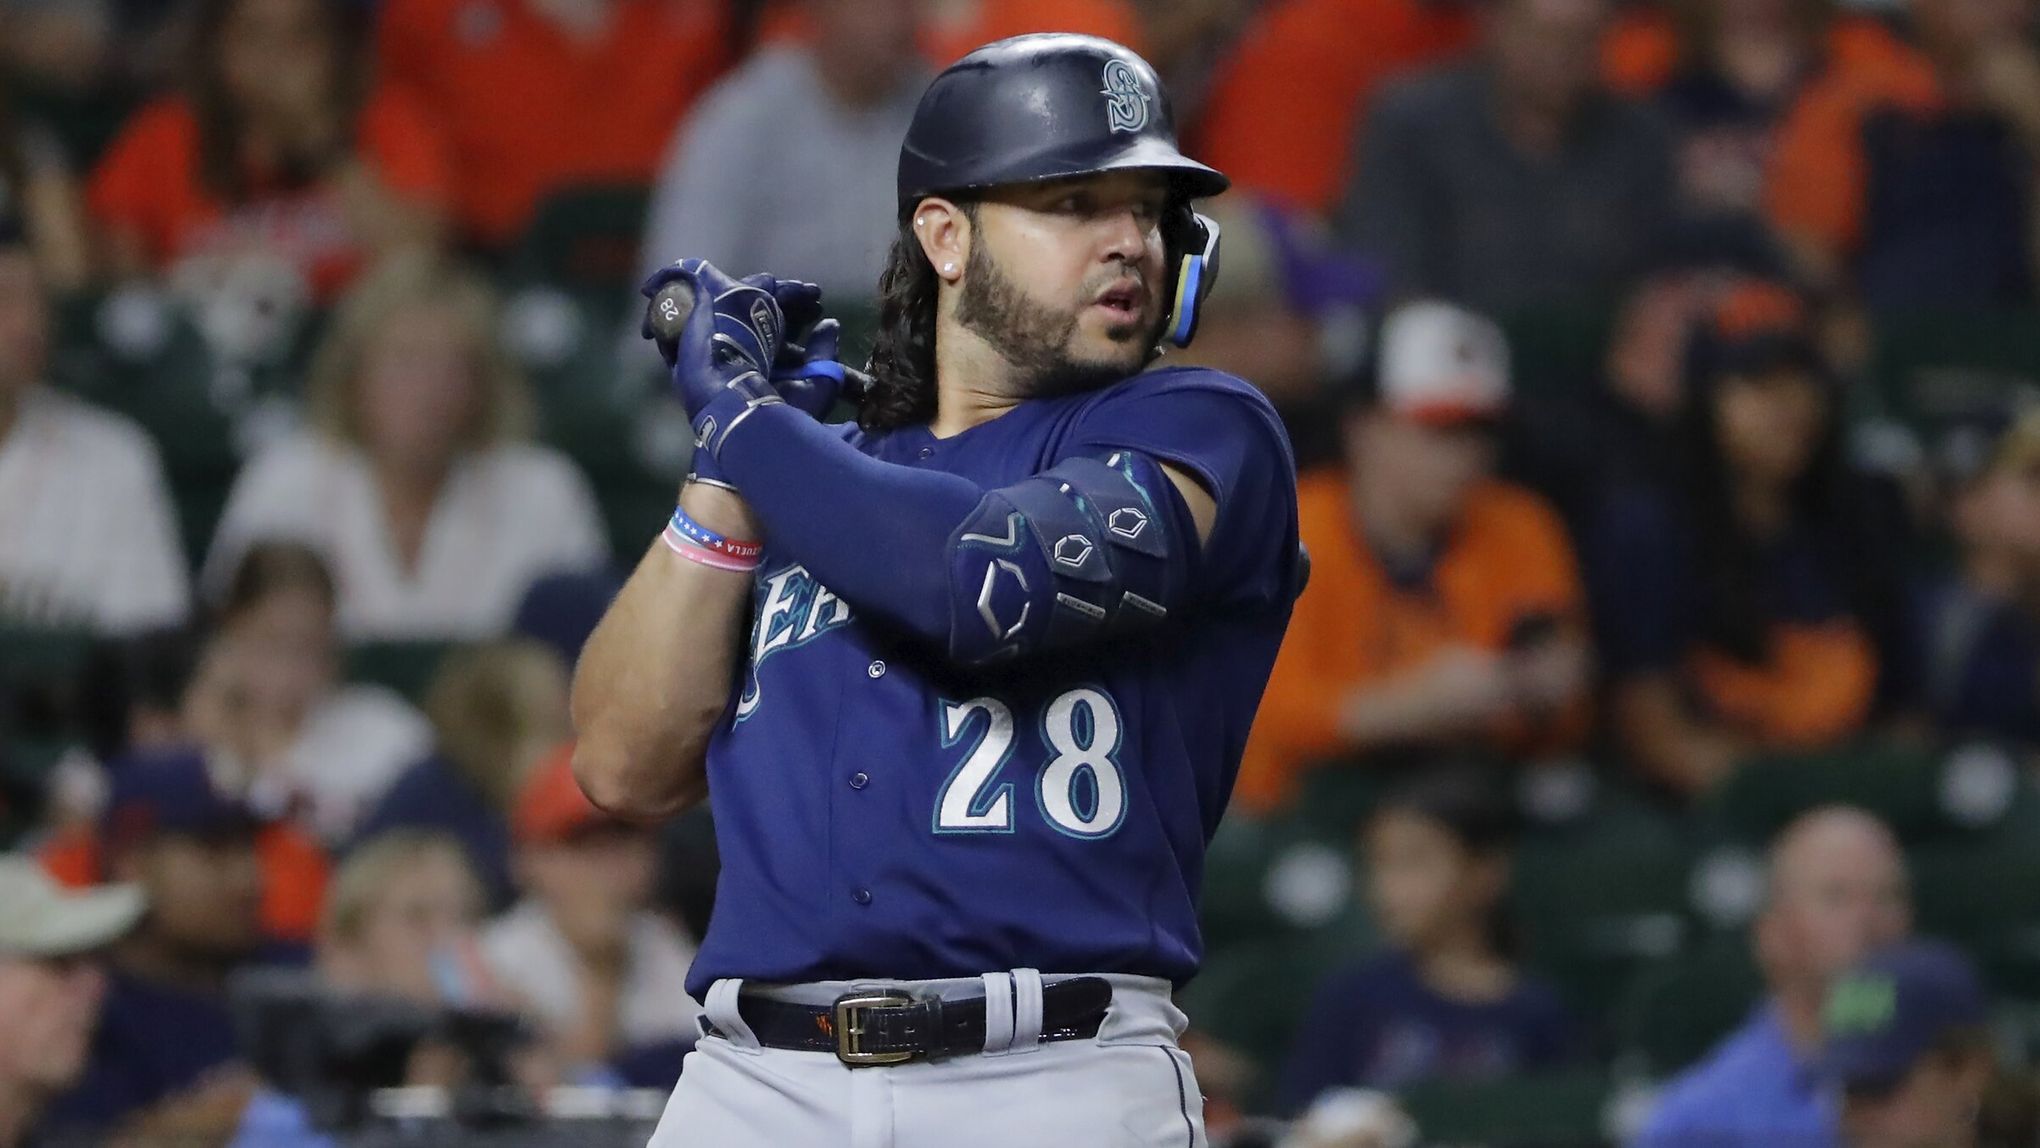 Mariners' Eugenio Suárez: the person and player you want on your